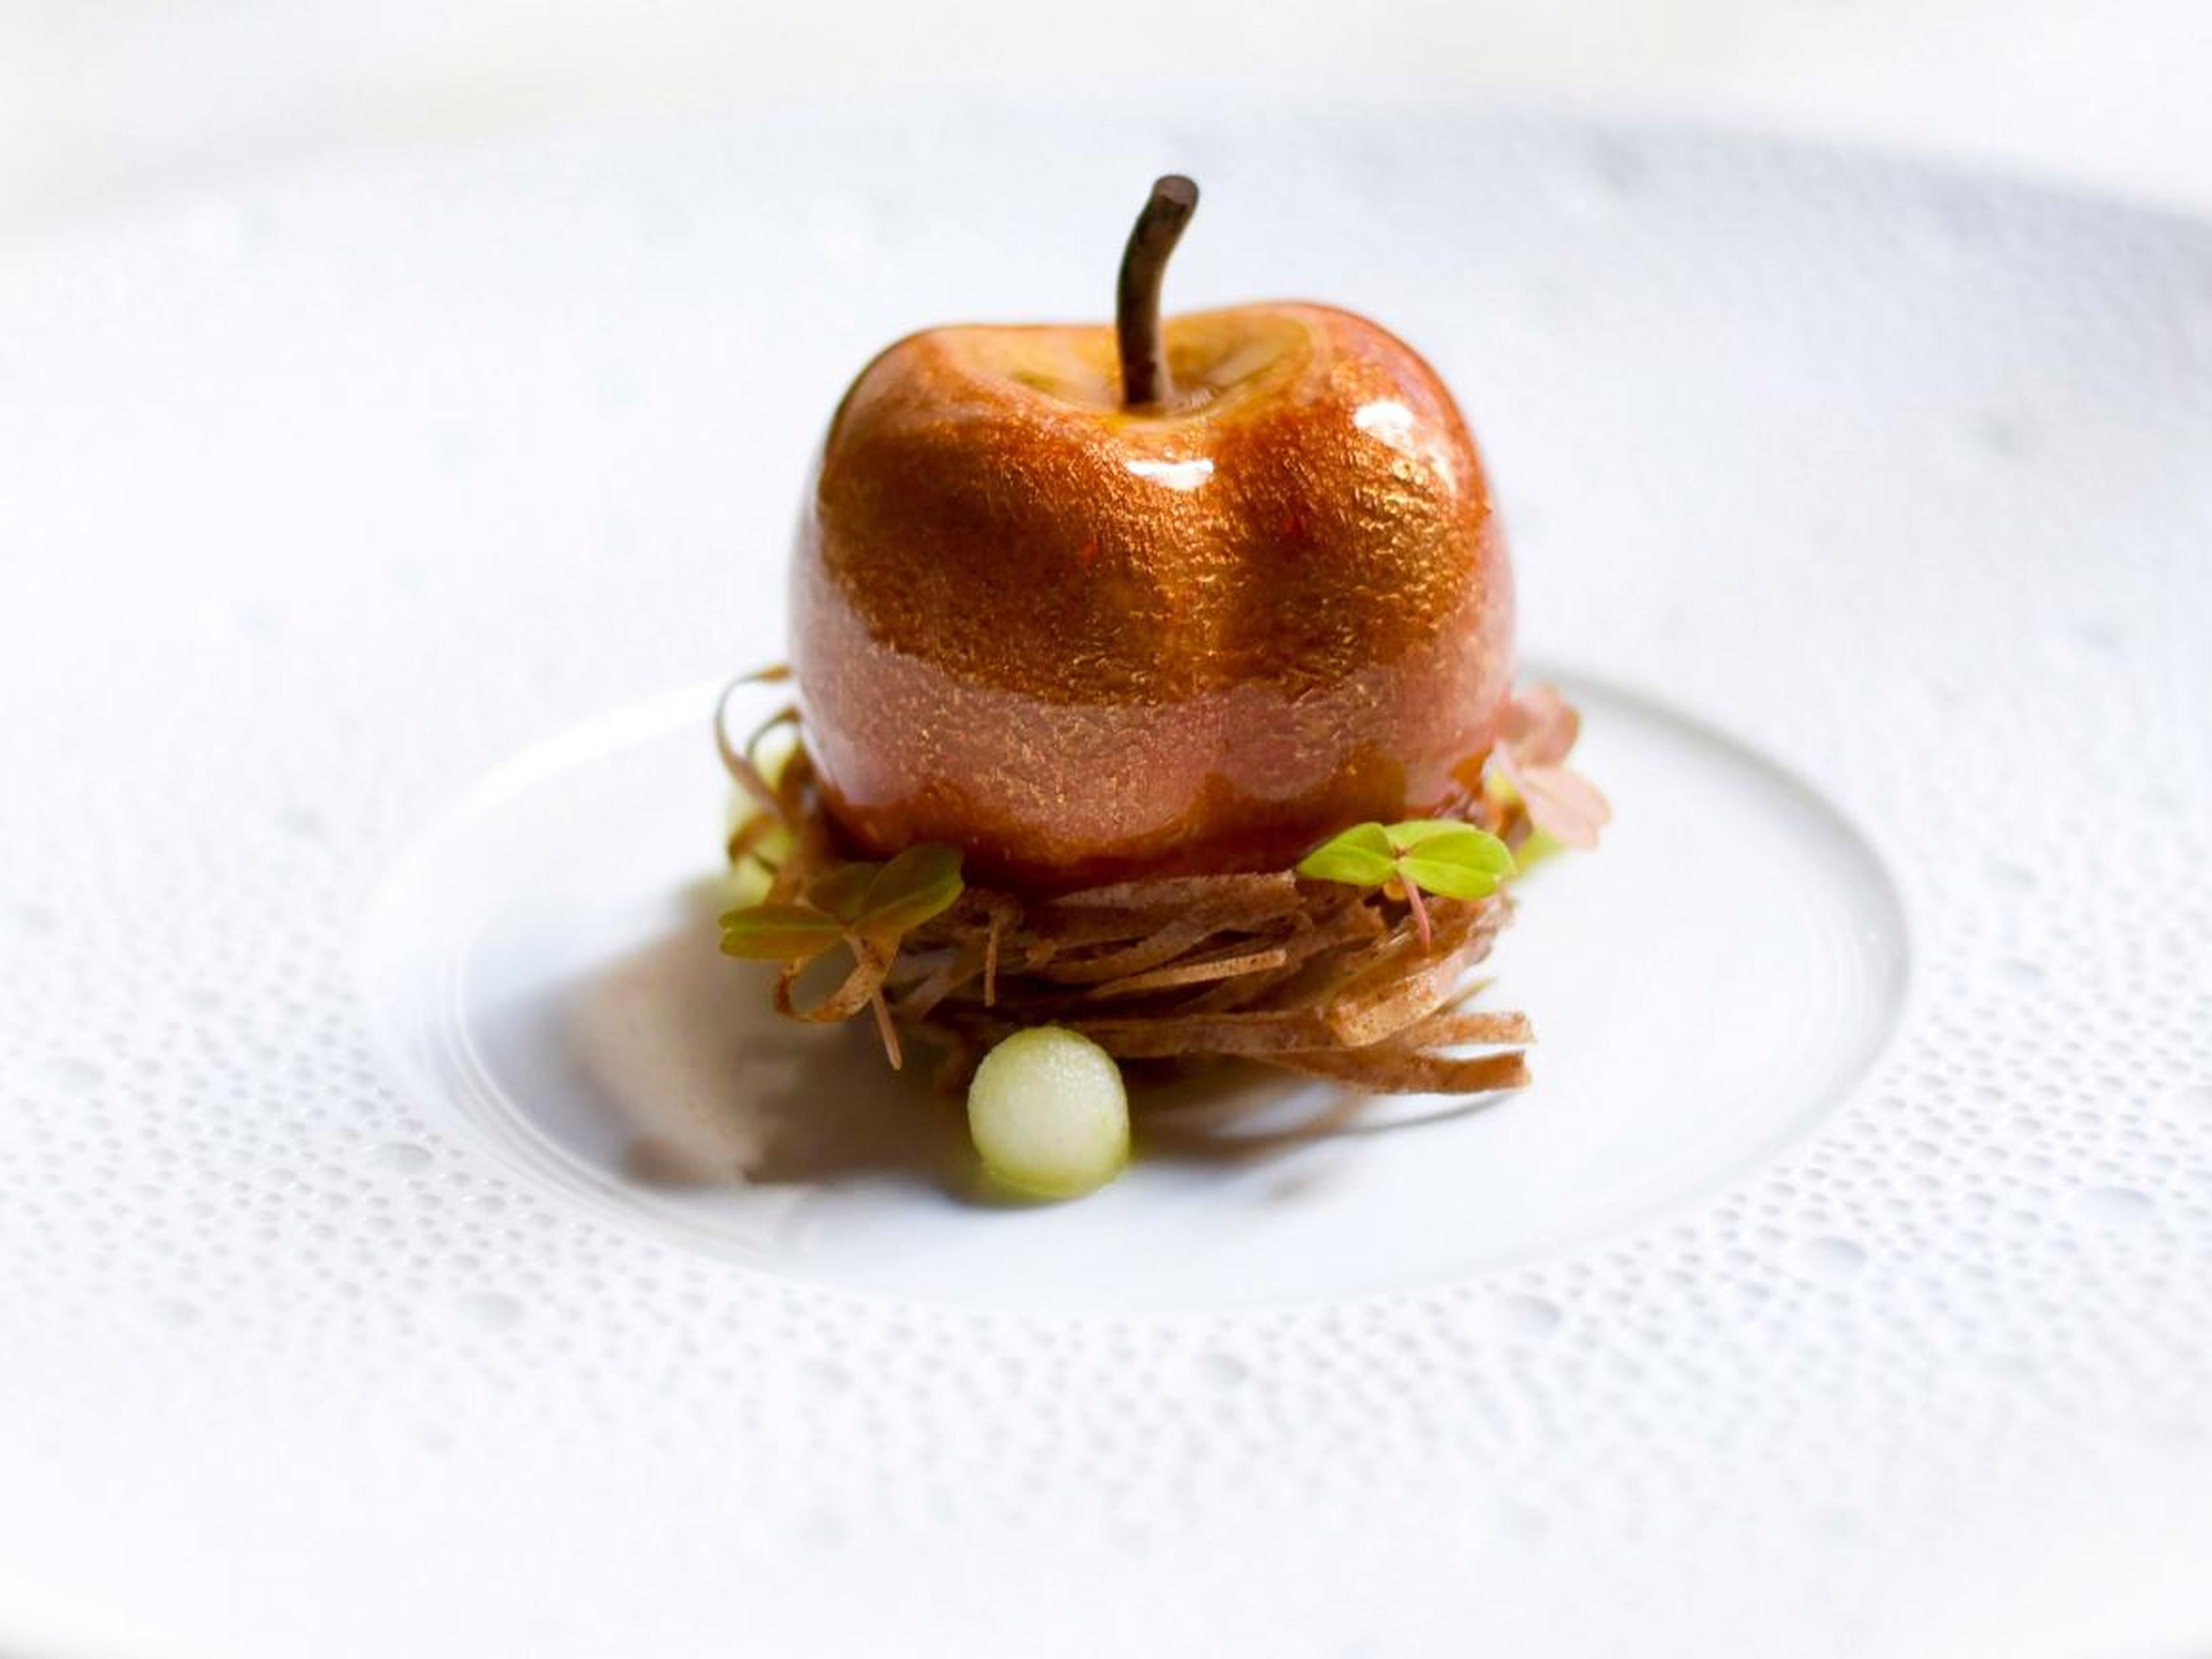 Holidays look quite different at Michelin-star restaurants.